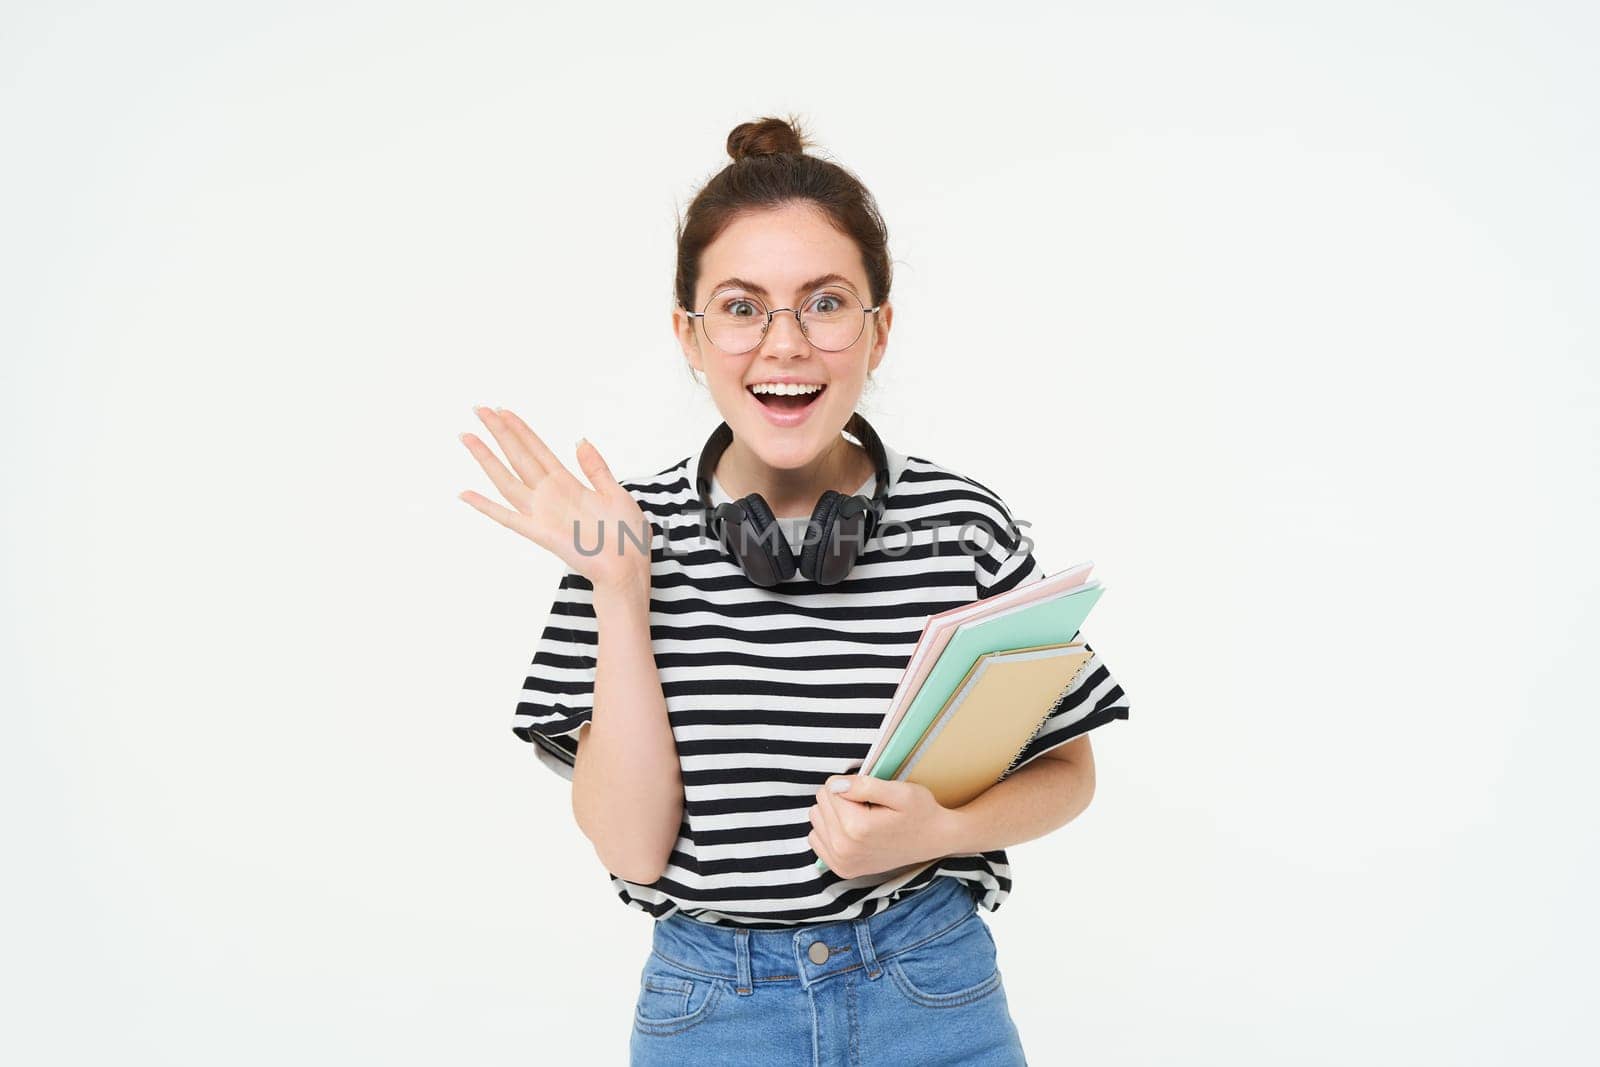 Portrait of excited young woman in glasses, looks surprised and happy. Student standing on white background with books and notebooks.